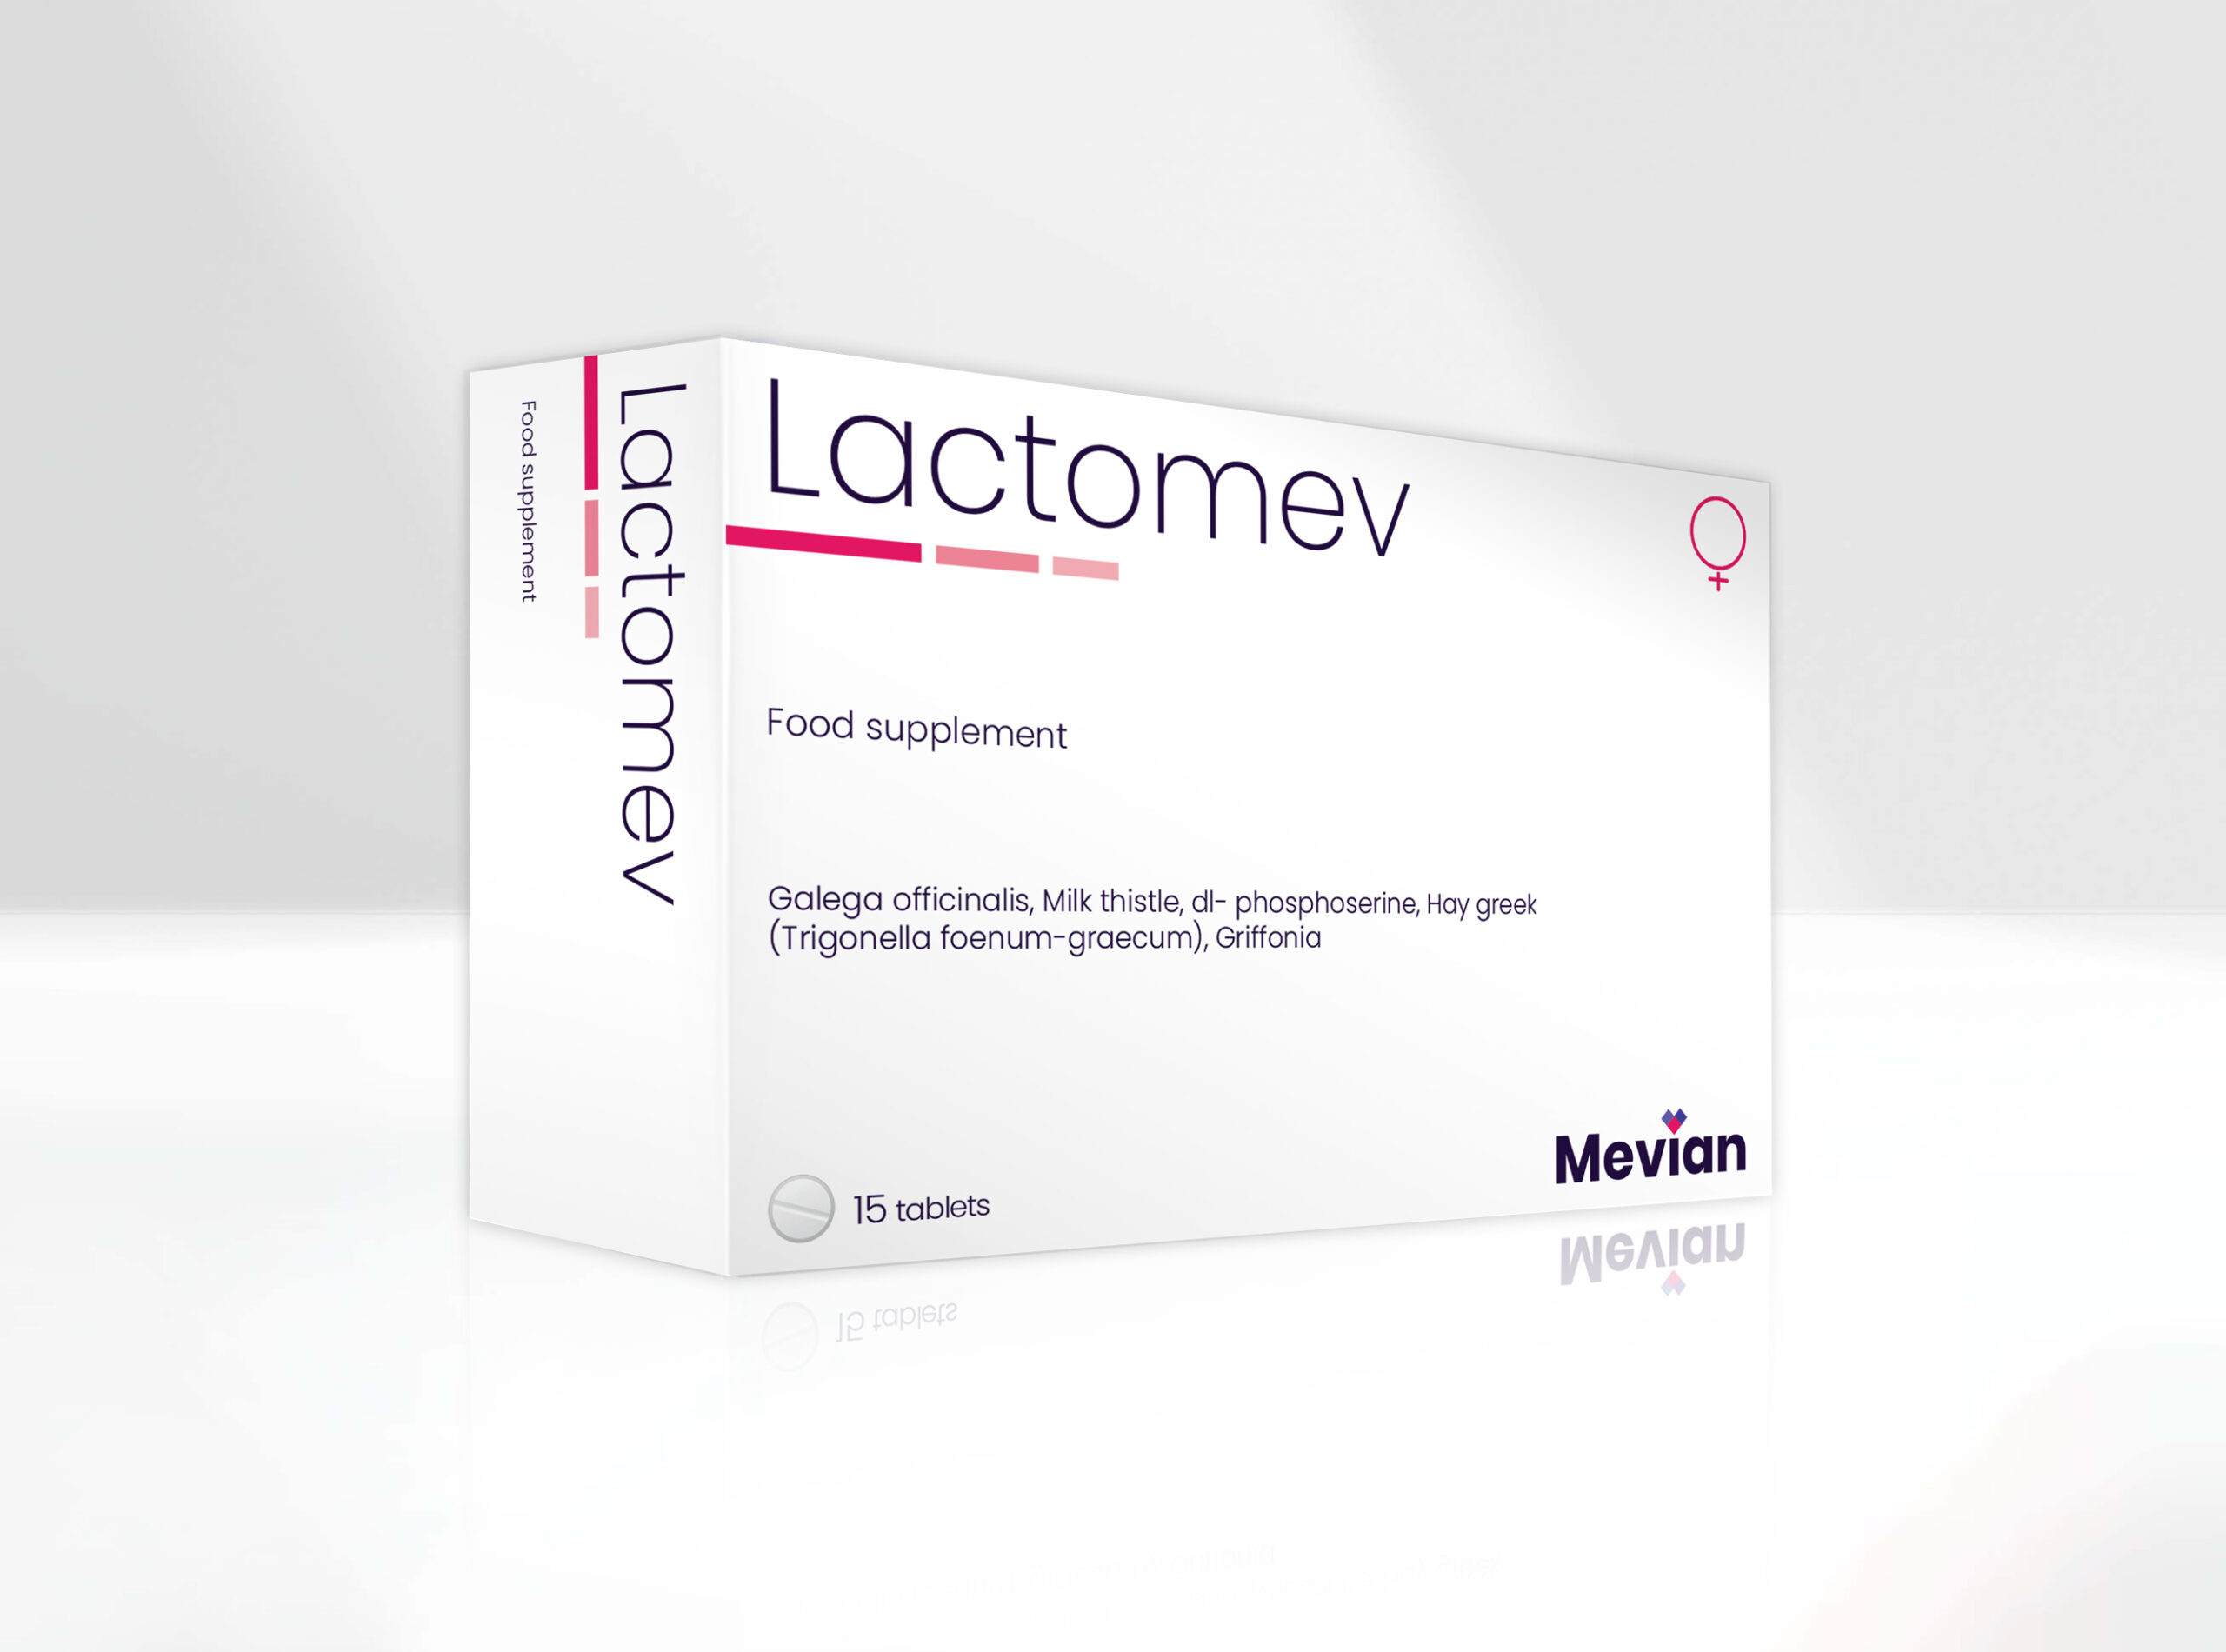 Lactomev stimulates galactagogue function and body weight. Support the normal mood, relaxation, and mental well-being.